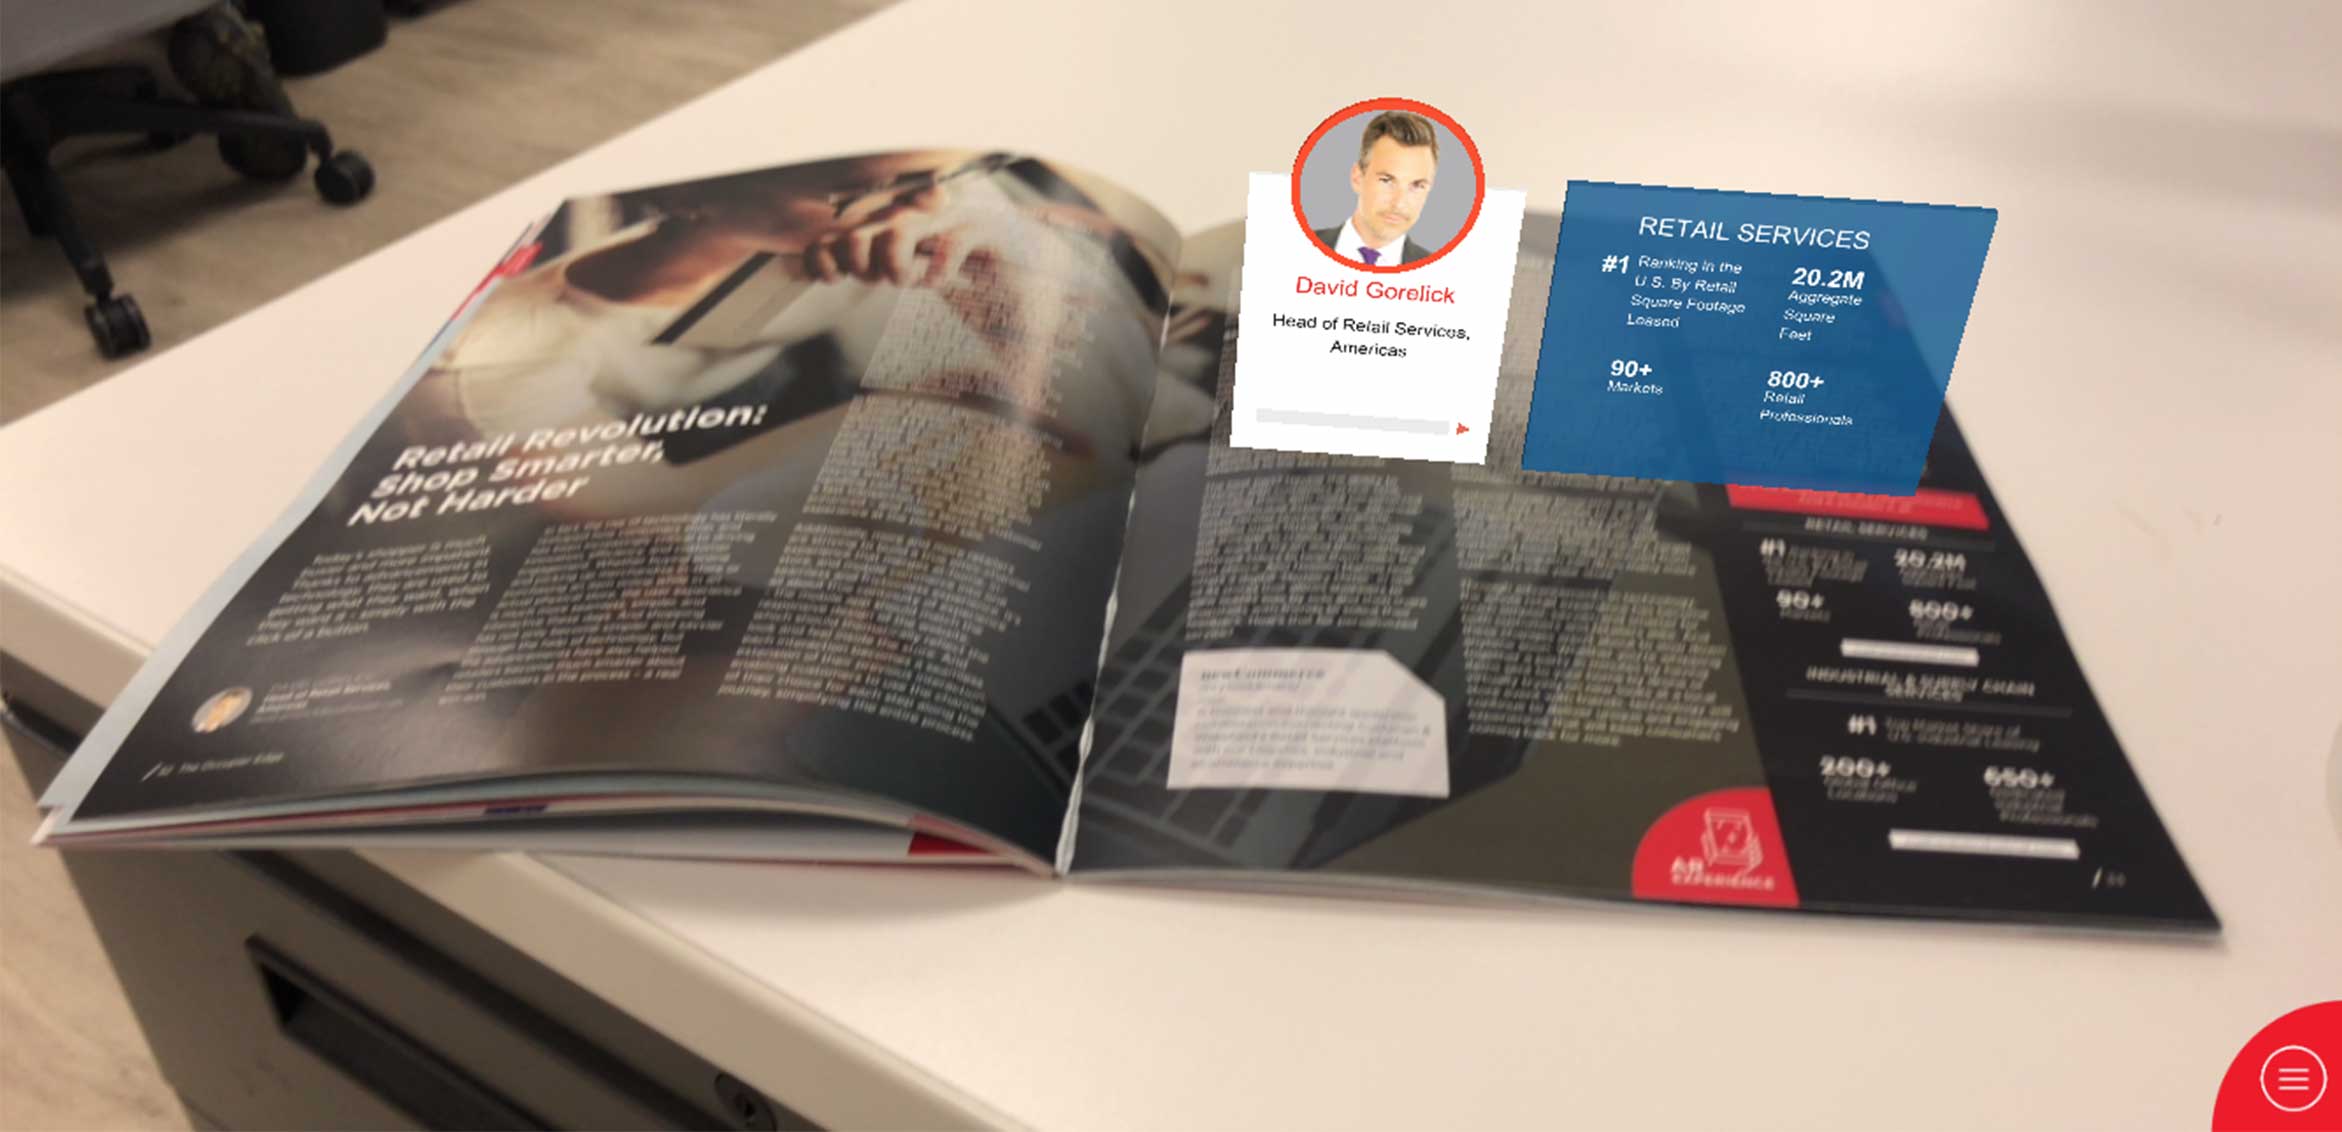 augmented reality content overlay on pages of Cushman & Wakefield's quarterly print publication